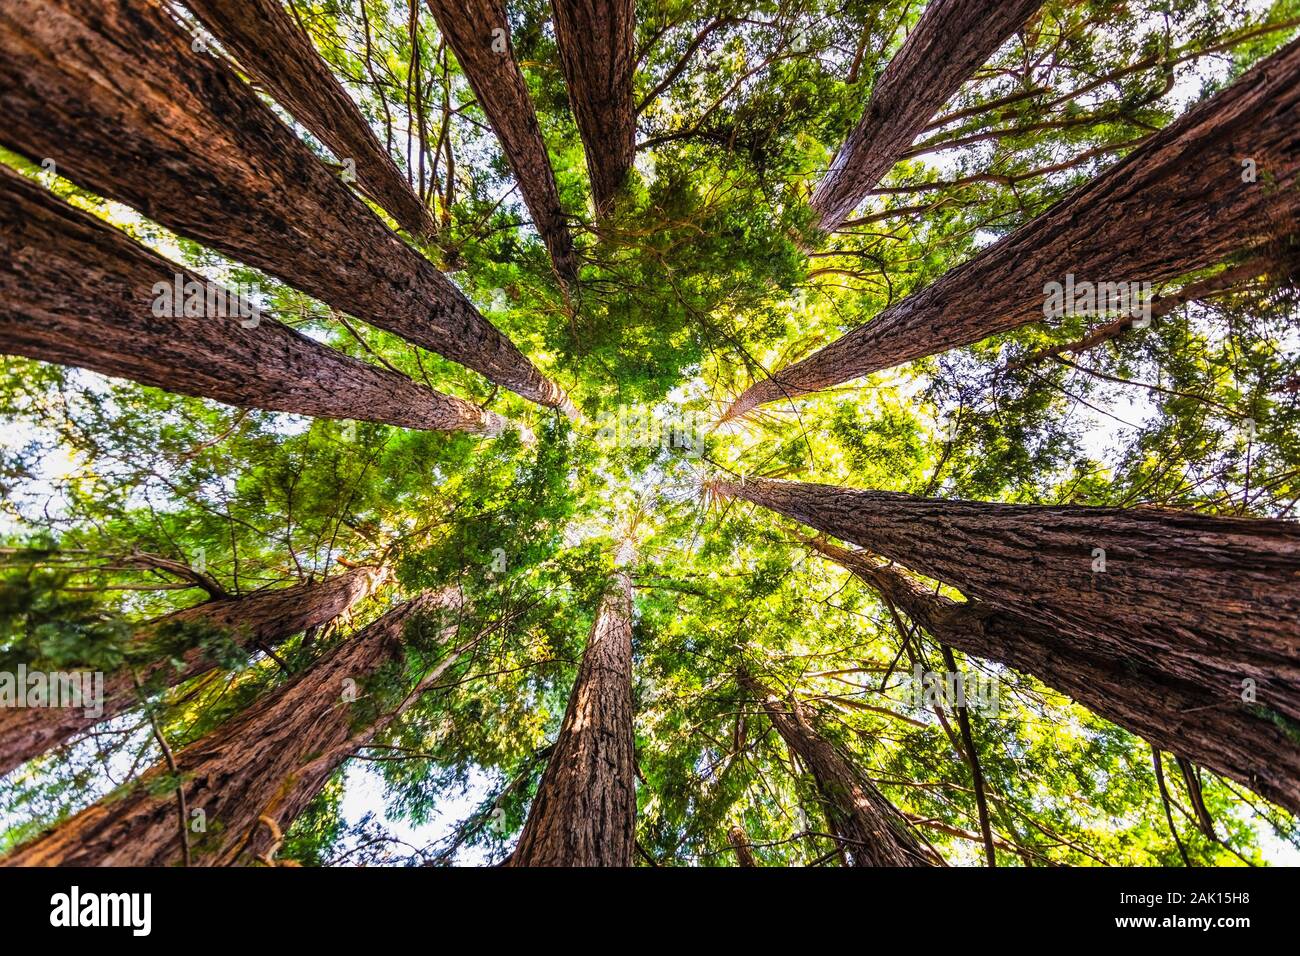 Looking up in a Coastal Redwood forest (Sequoia Sempervirens), converging tree trunks surrounded by evergreen foliage, Purisima Creek Redwoods Preserv Stock Photo